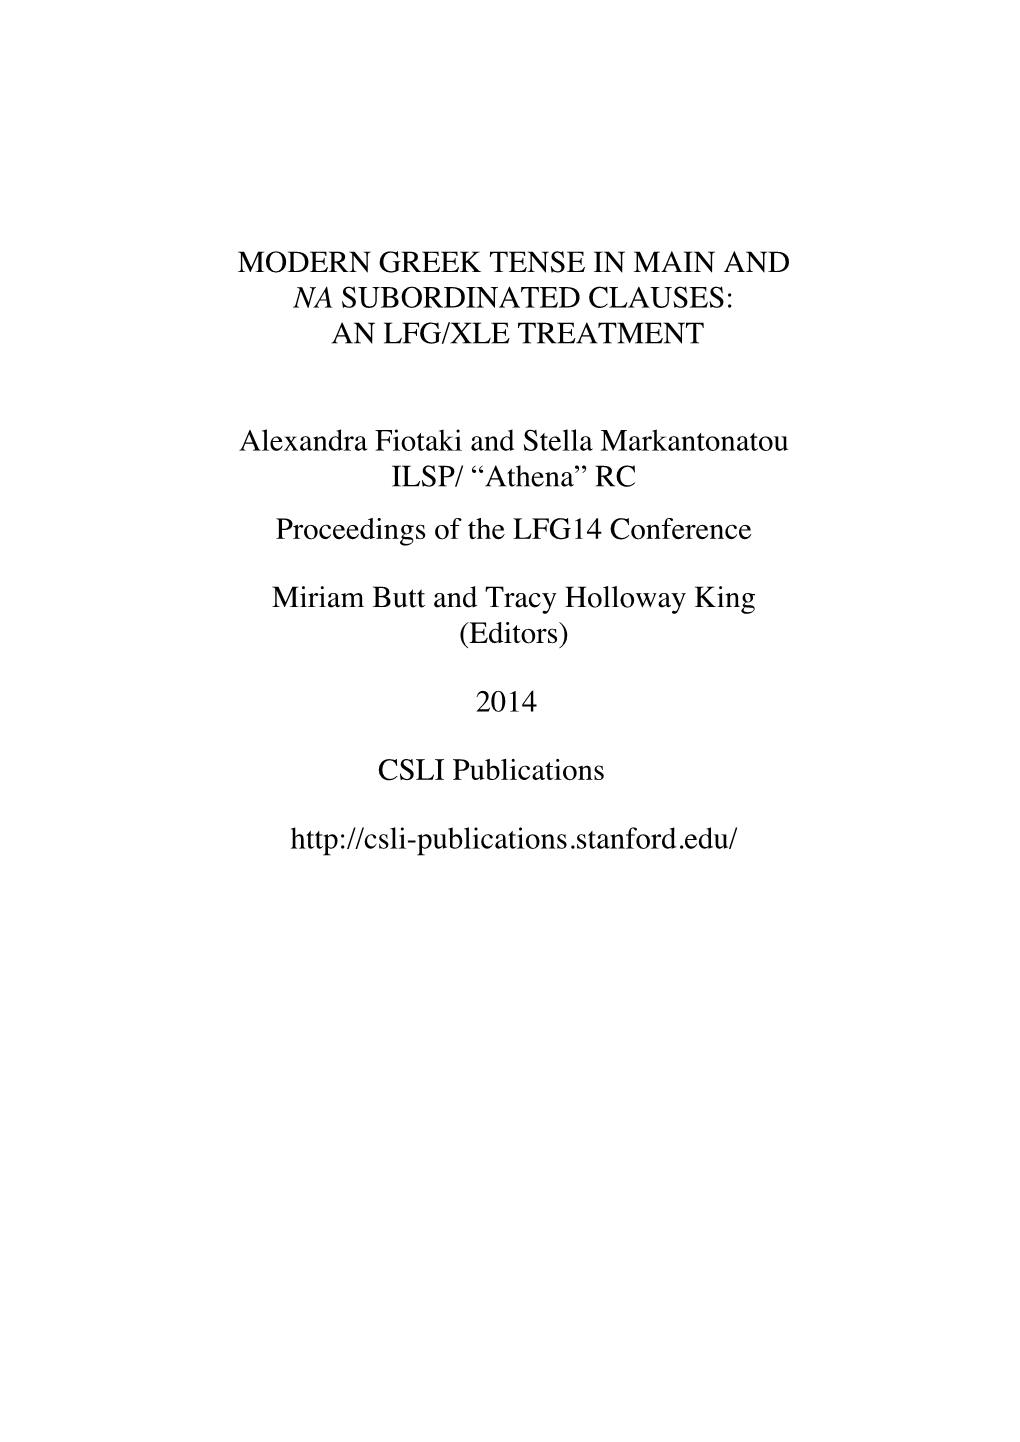 Modern Greek Tense in Main and Na Subordinated Clauses: an Lfg/Xle Treatment